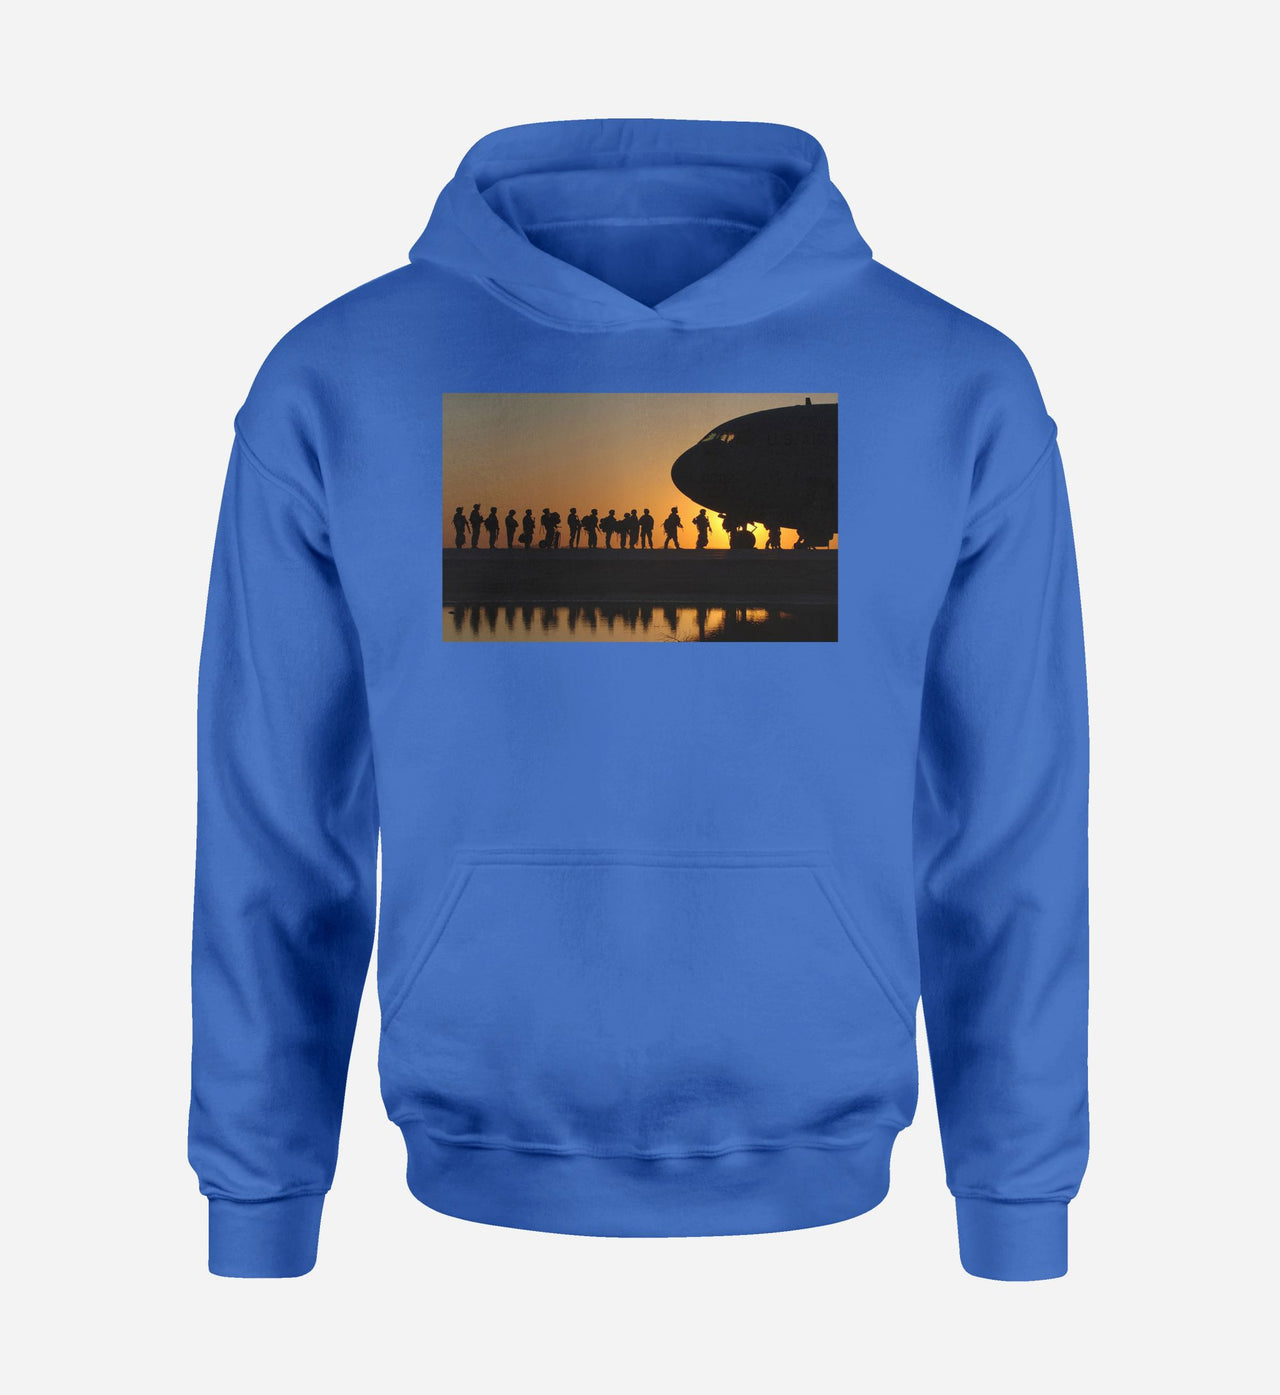 Band of Brothers Theme Soldiers Designed Hoodies